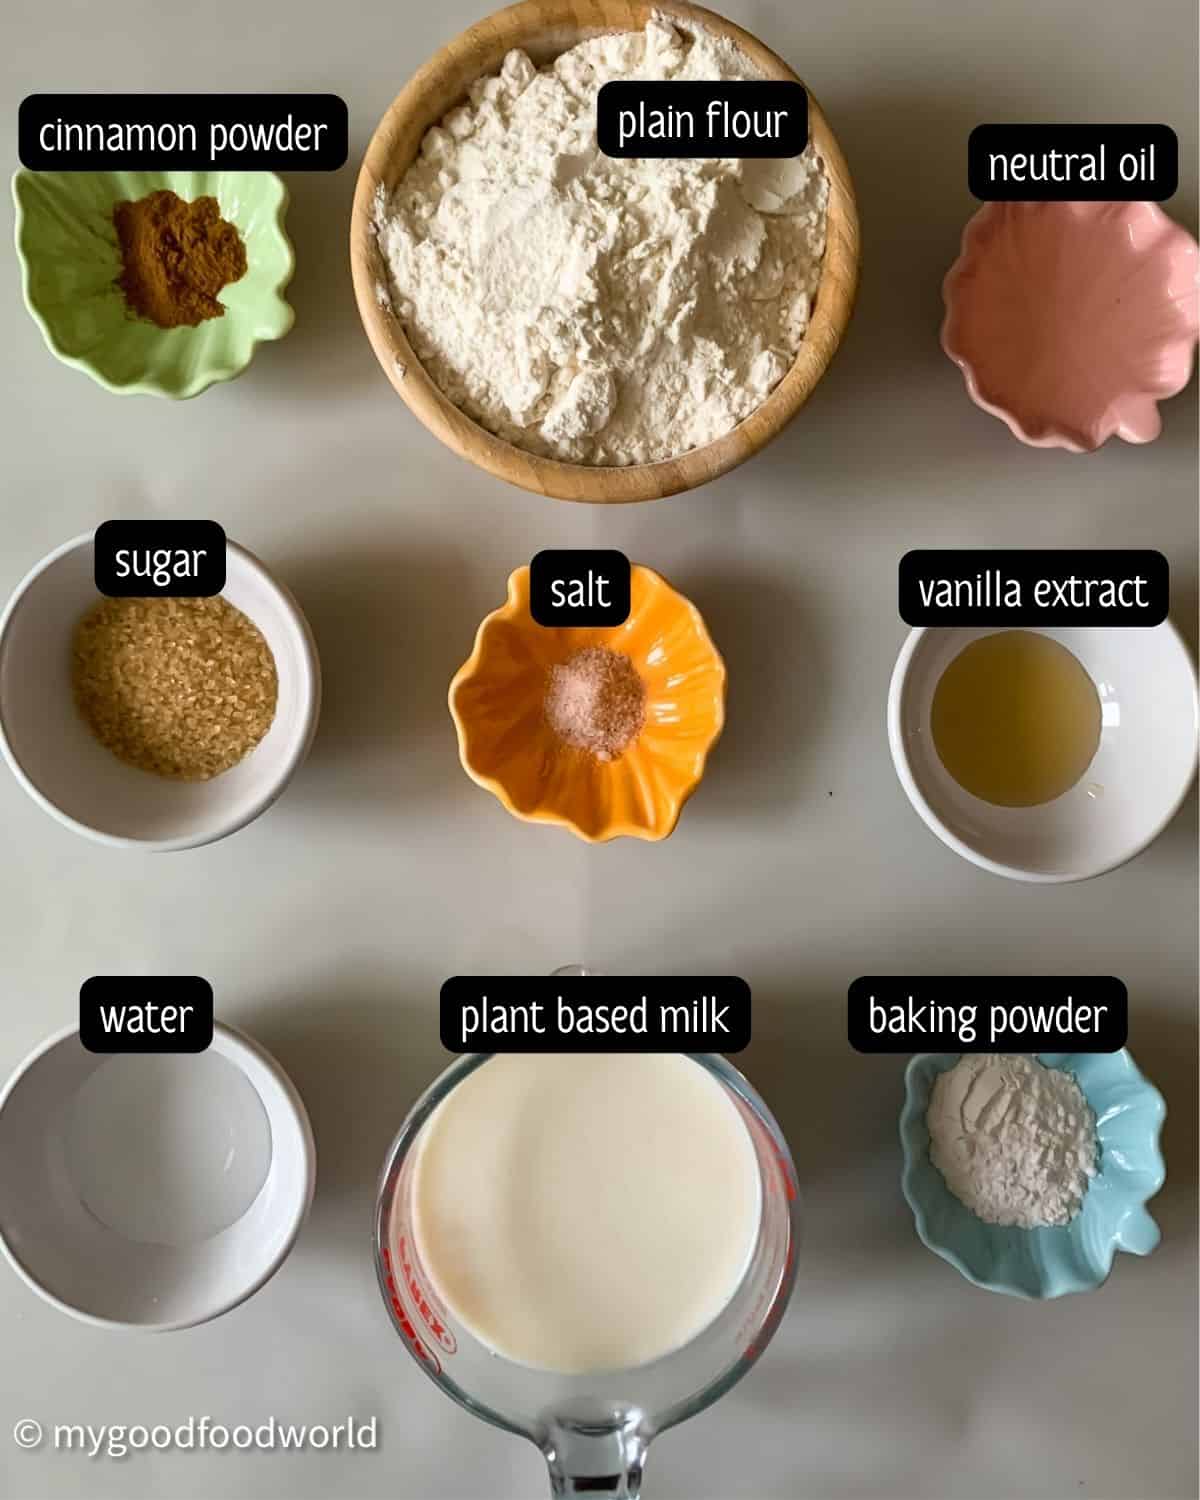 Ingredients for vegan pancake recipe without eggs, namely, all purpose flour, plant based milk, baking powder, vanilla extract, sugar, cinnamon powder, oil, and water are placed in small bowls next to each other.